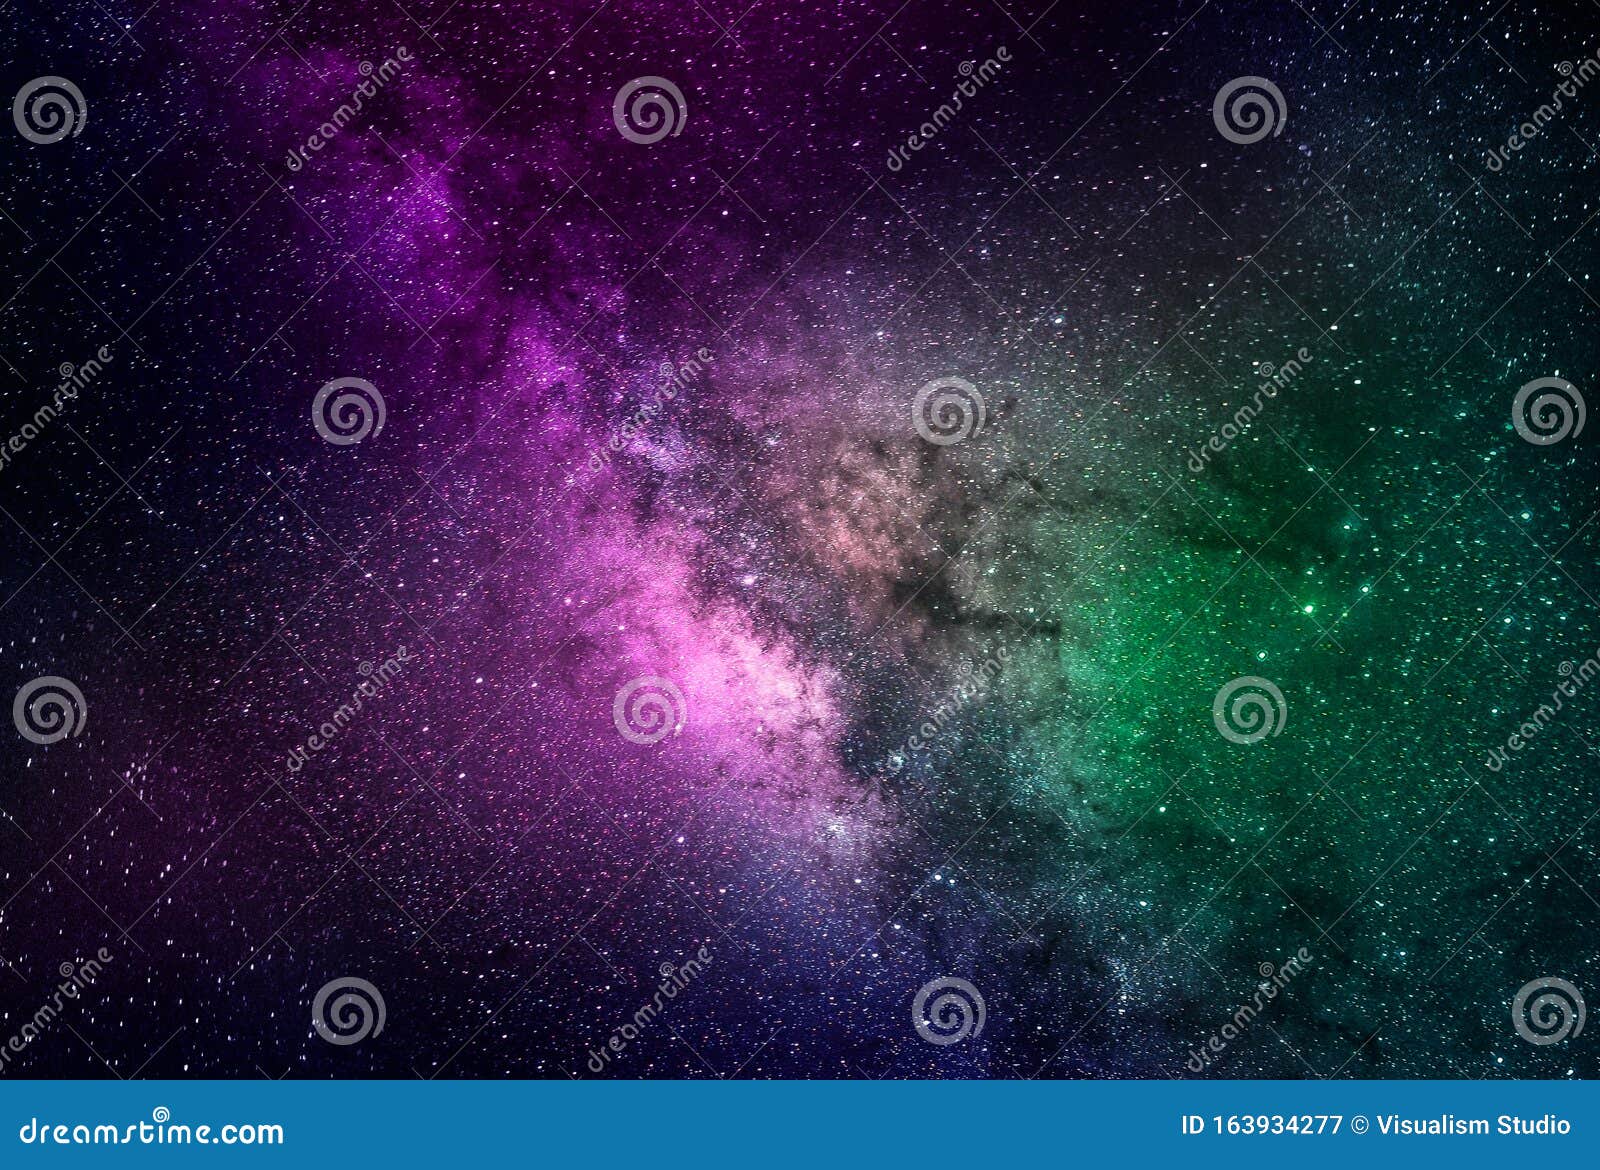 Abstract Galaxy Background With Stars And Planets With Green And